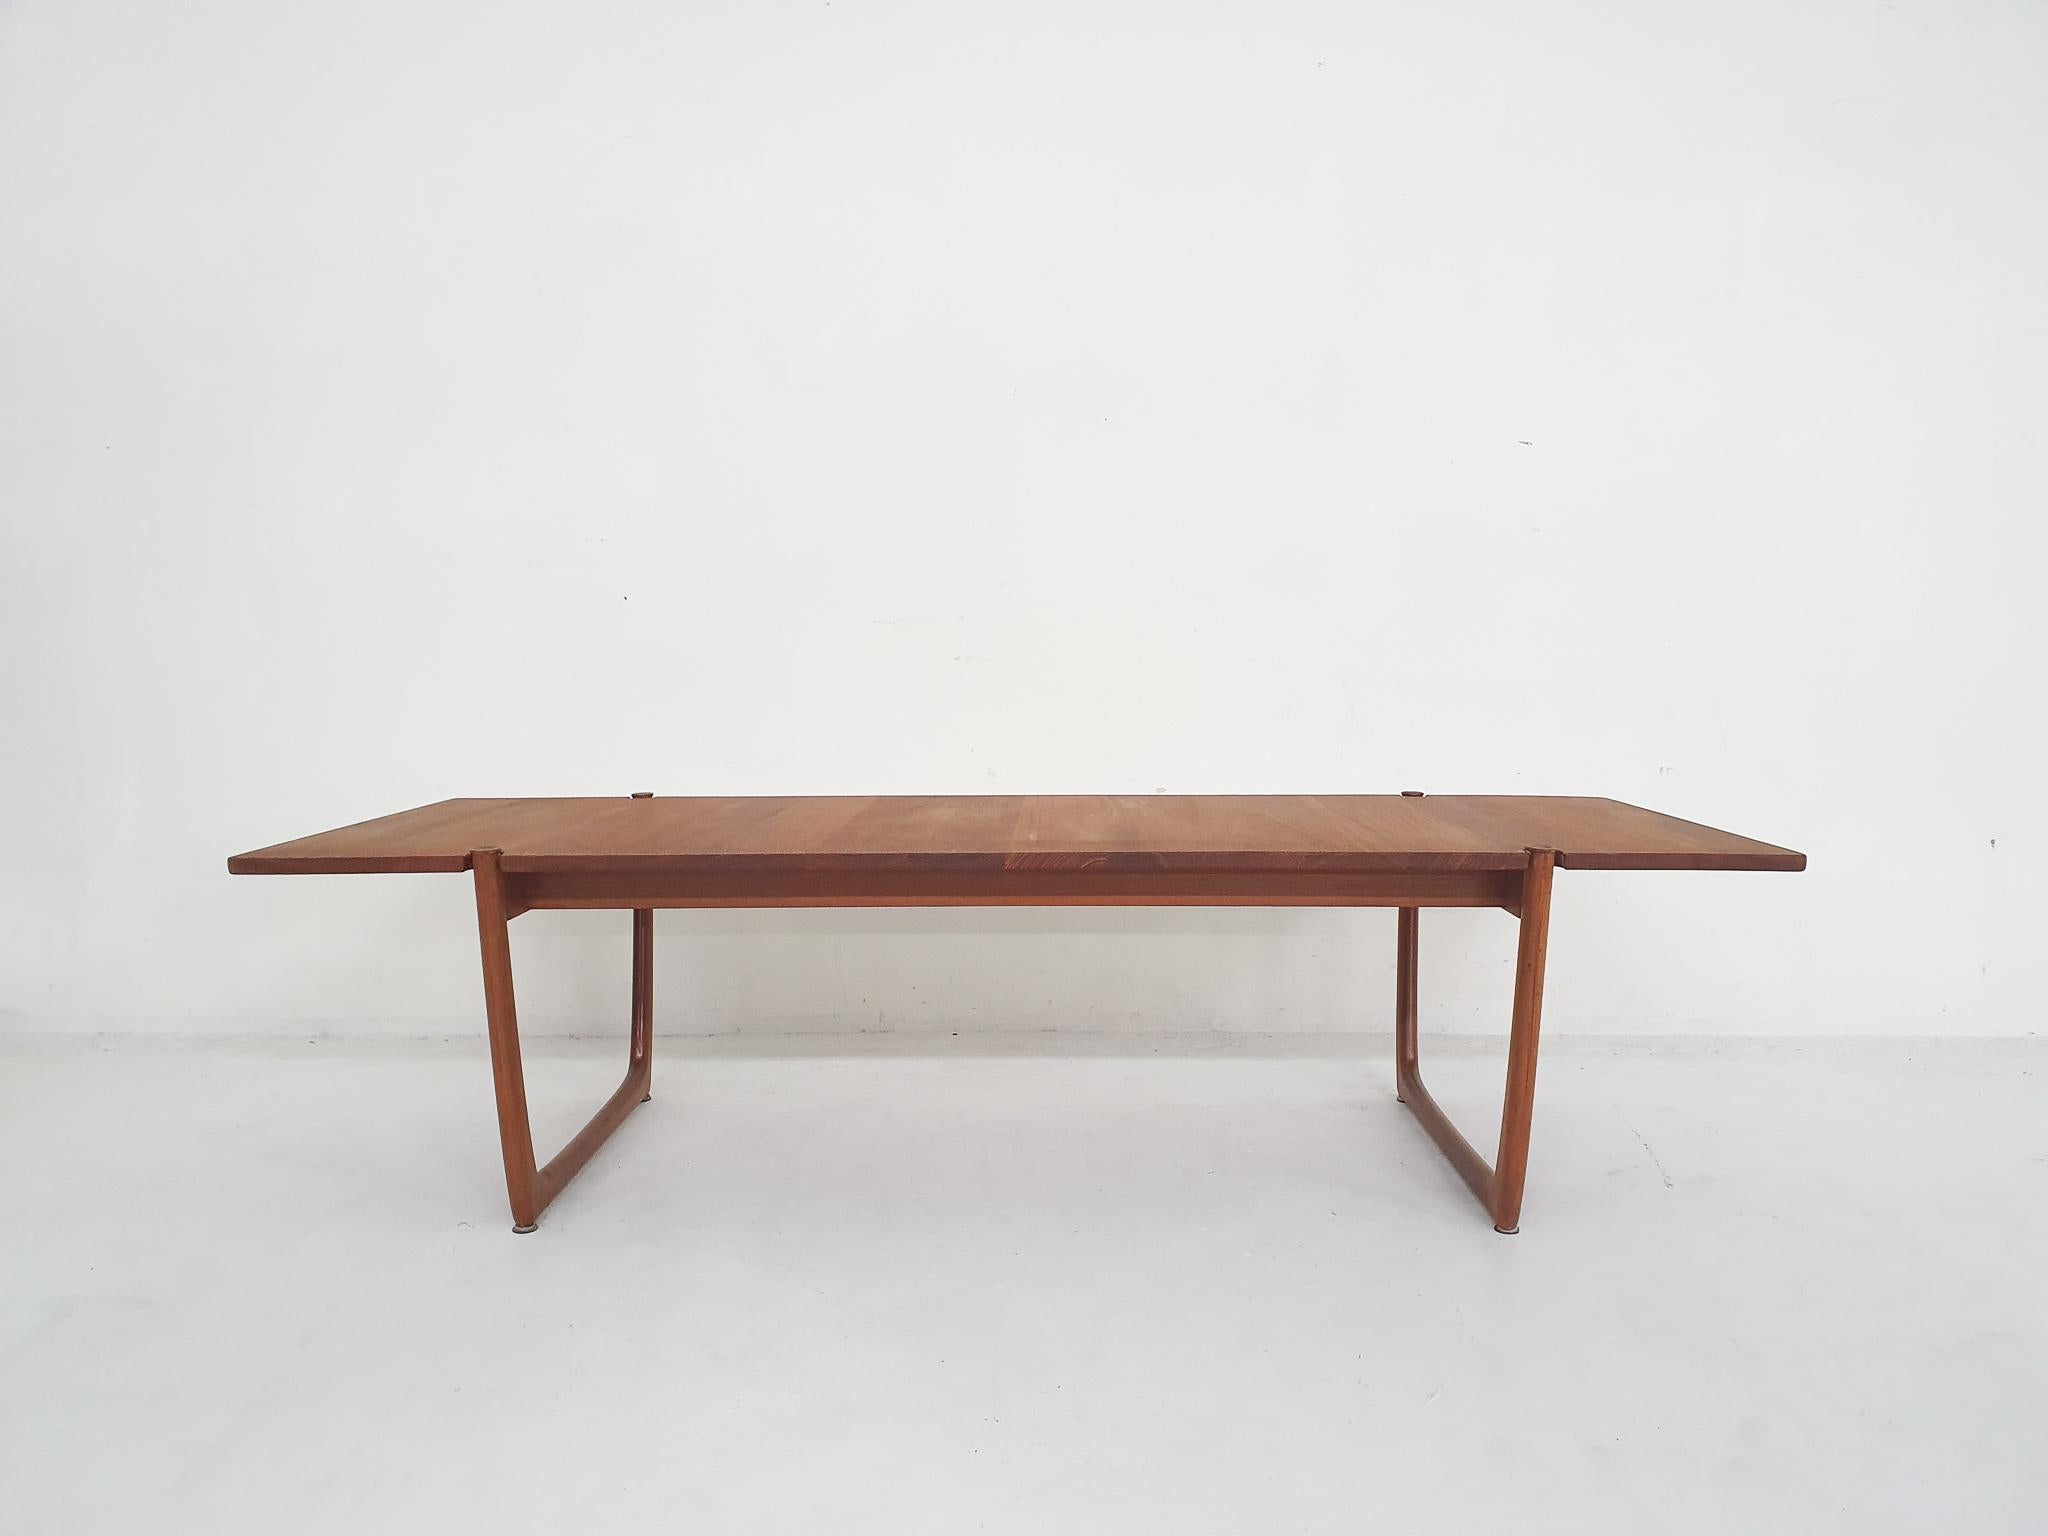 Large coffee table 175cm(!) in teak veneer by Peter Hvidt and Orla Molgaard Nielsen for France and Son. Marked with a tag under the table.
We have refinshed the top.

Peter Hvidt was a Danish architect and furniture designer. He co-founded the